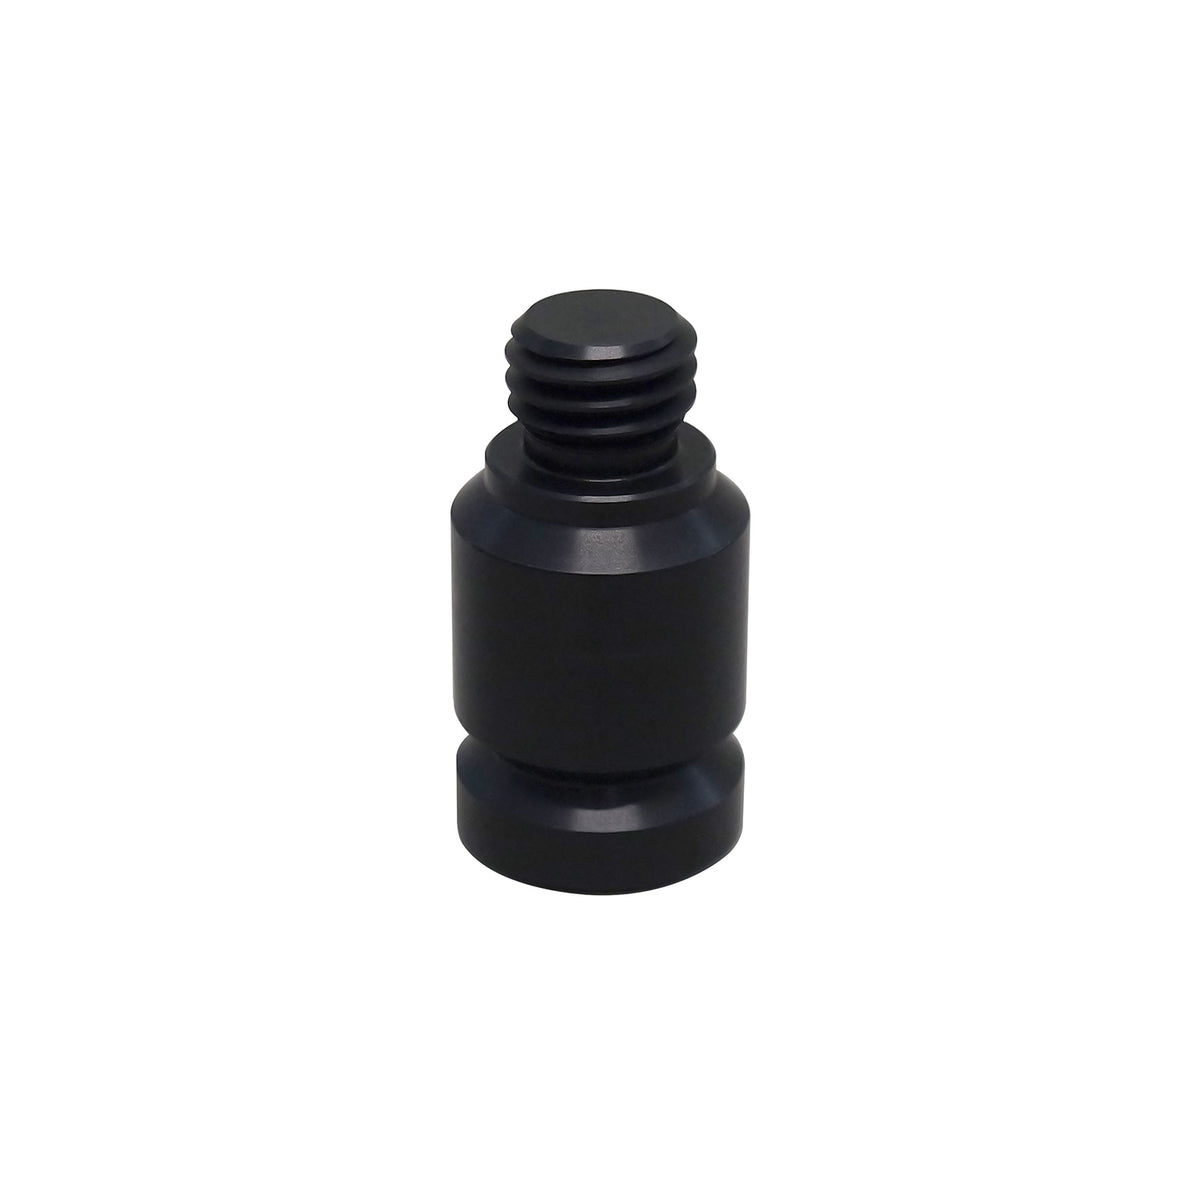 SECO Mount Base for Prism Assembly -Adapters- eGPS Solutions Inc.